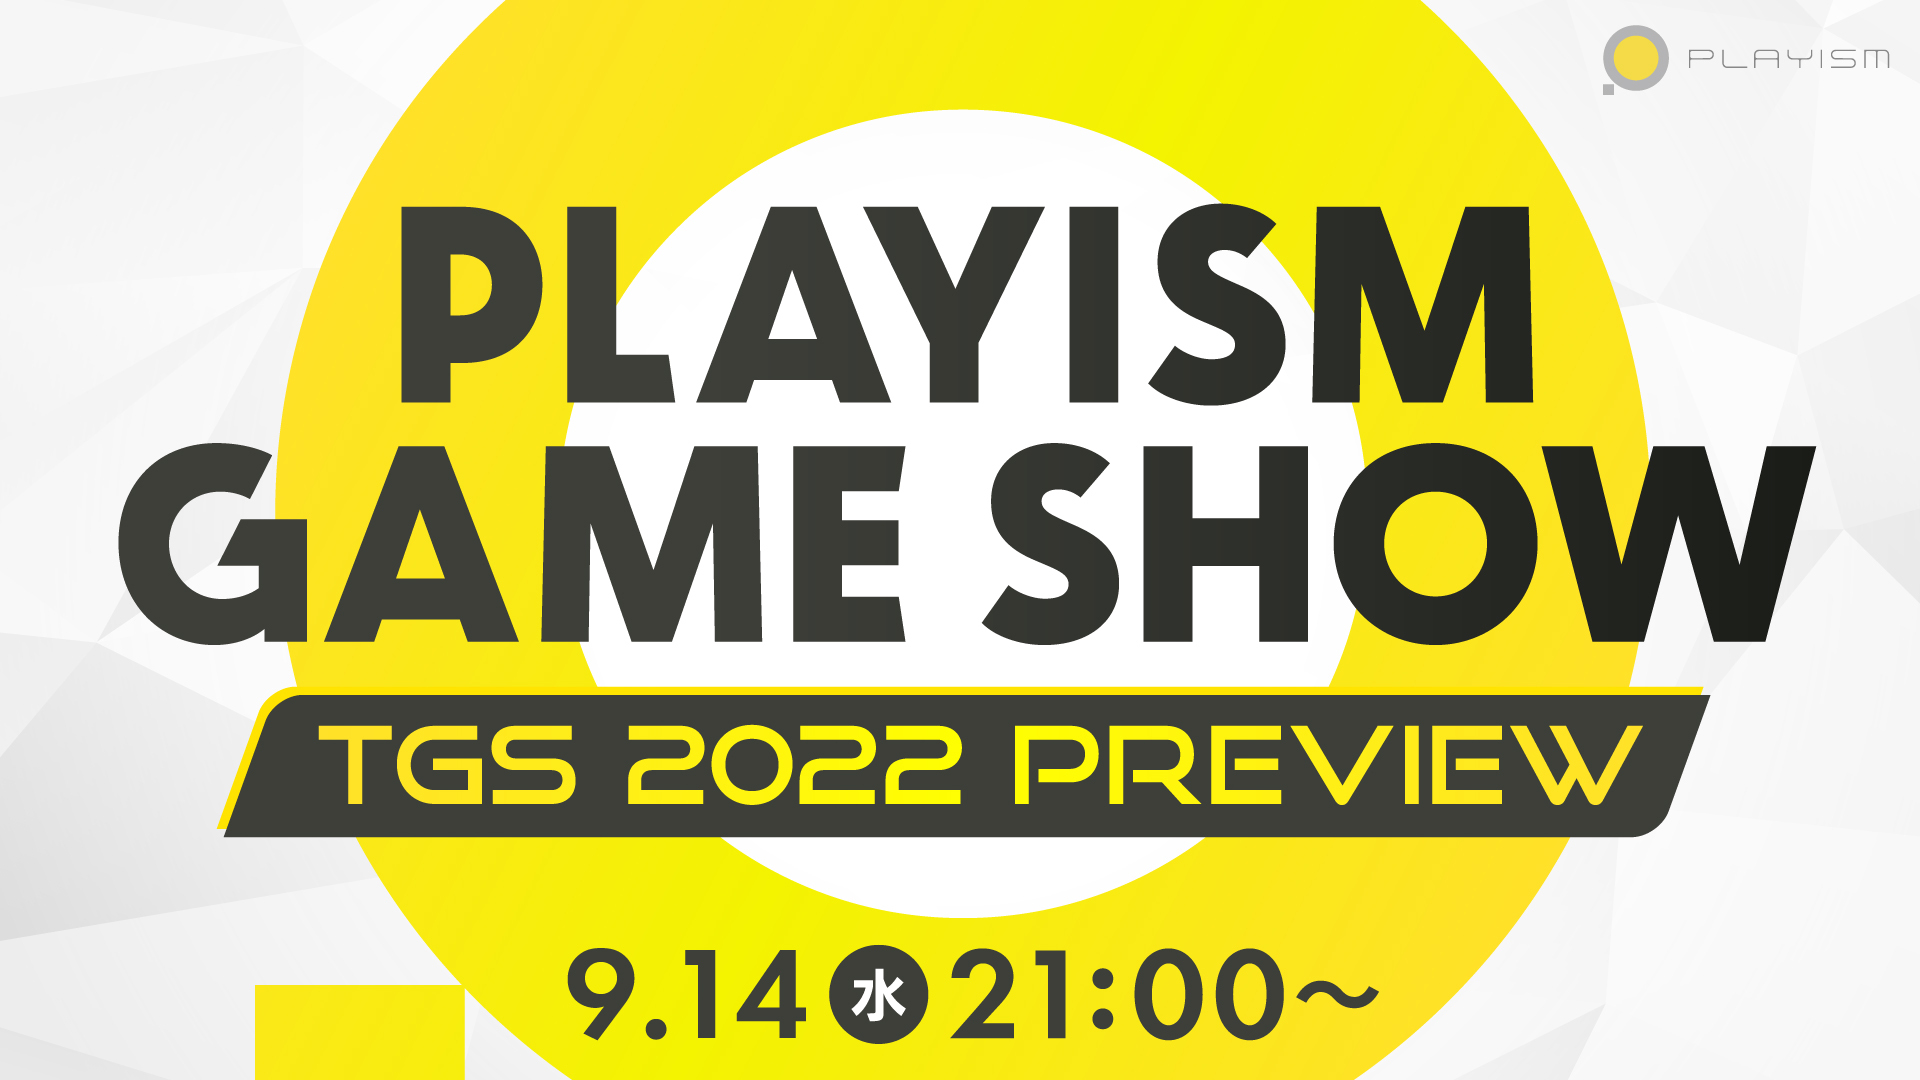 PLAYISM'S Tokyo Game Show Lineup Announcement Broadcast PLAYISM GAME SHOW TGS 2022 on 9/14!